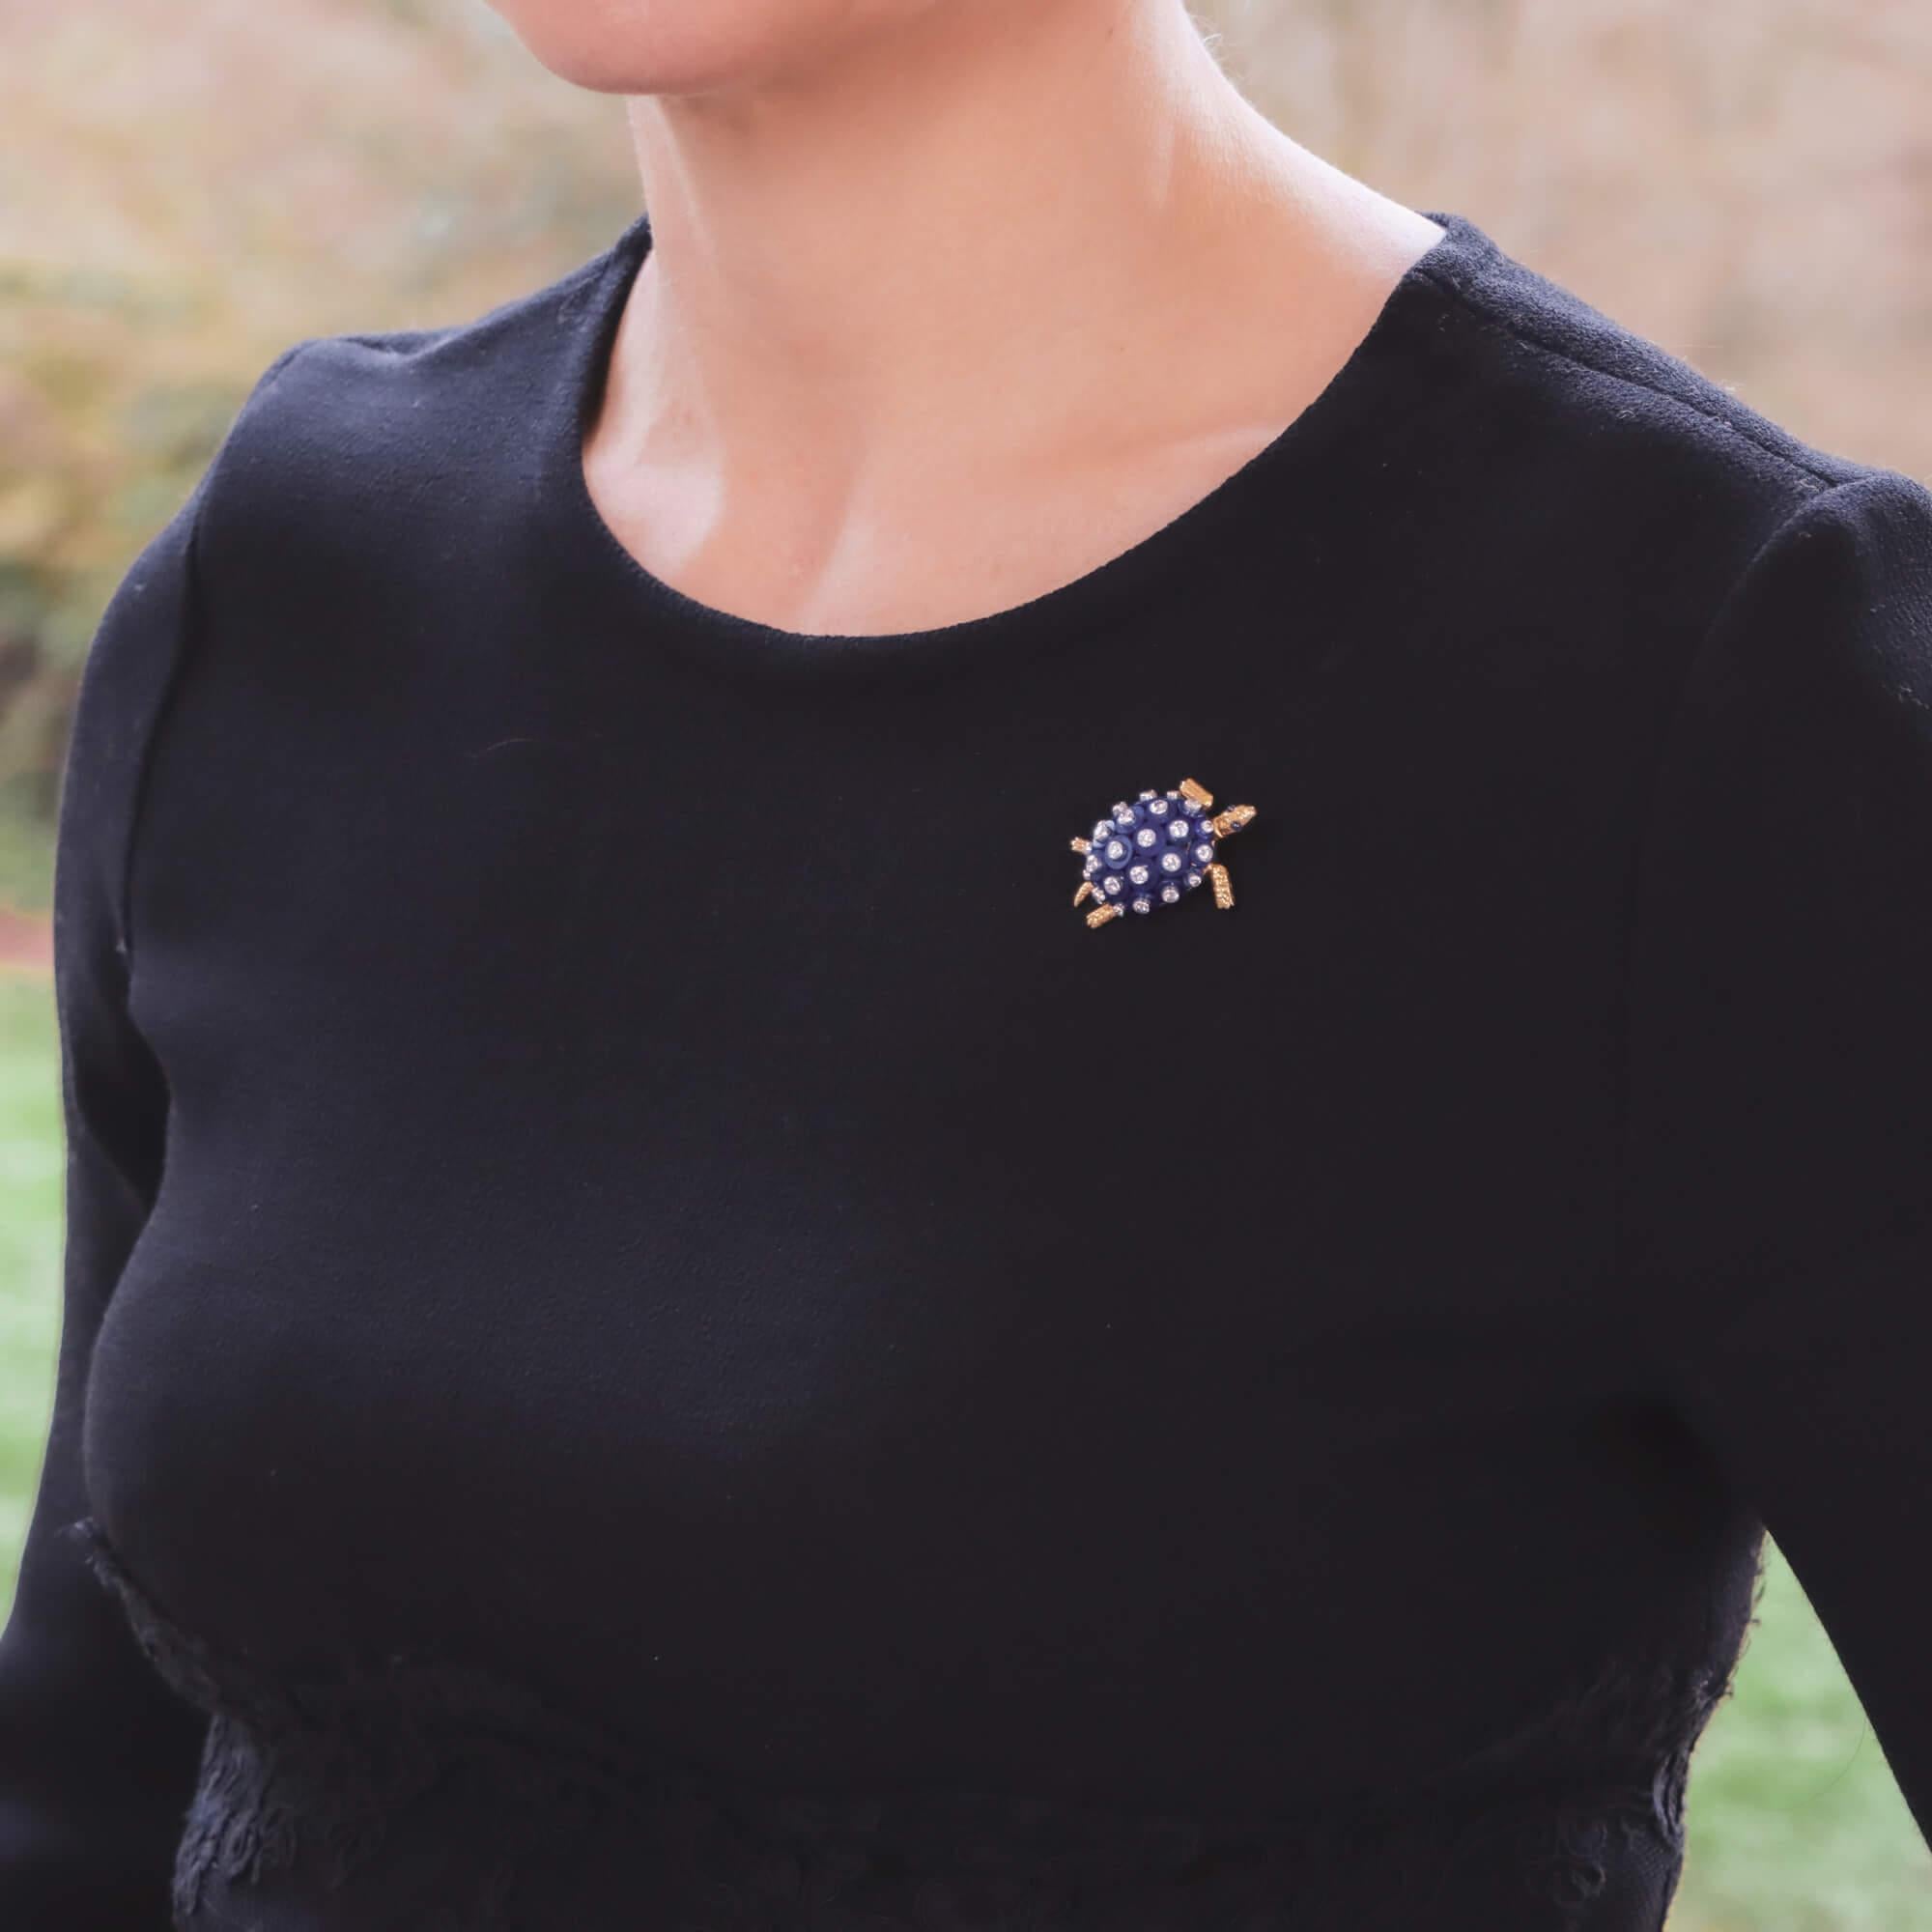 A beautiful Cartier lapis lazuli, diamond and sapphire turtle brooch set in 18k yellow gold and platinum. 

The brooch depicts an elegant swimming turtle with hand engraved yellow gold legs, tail and head. The turtles shell is composed of a number